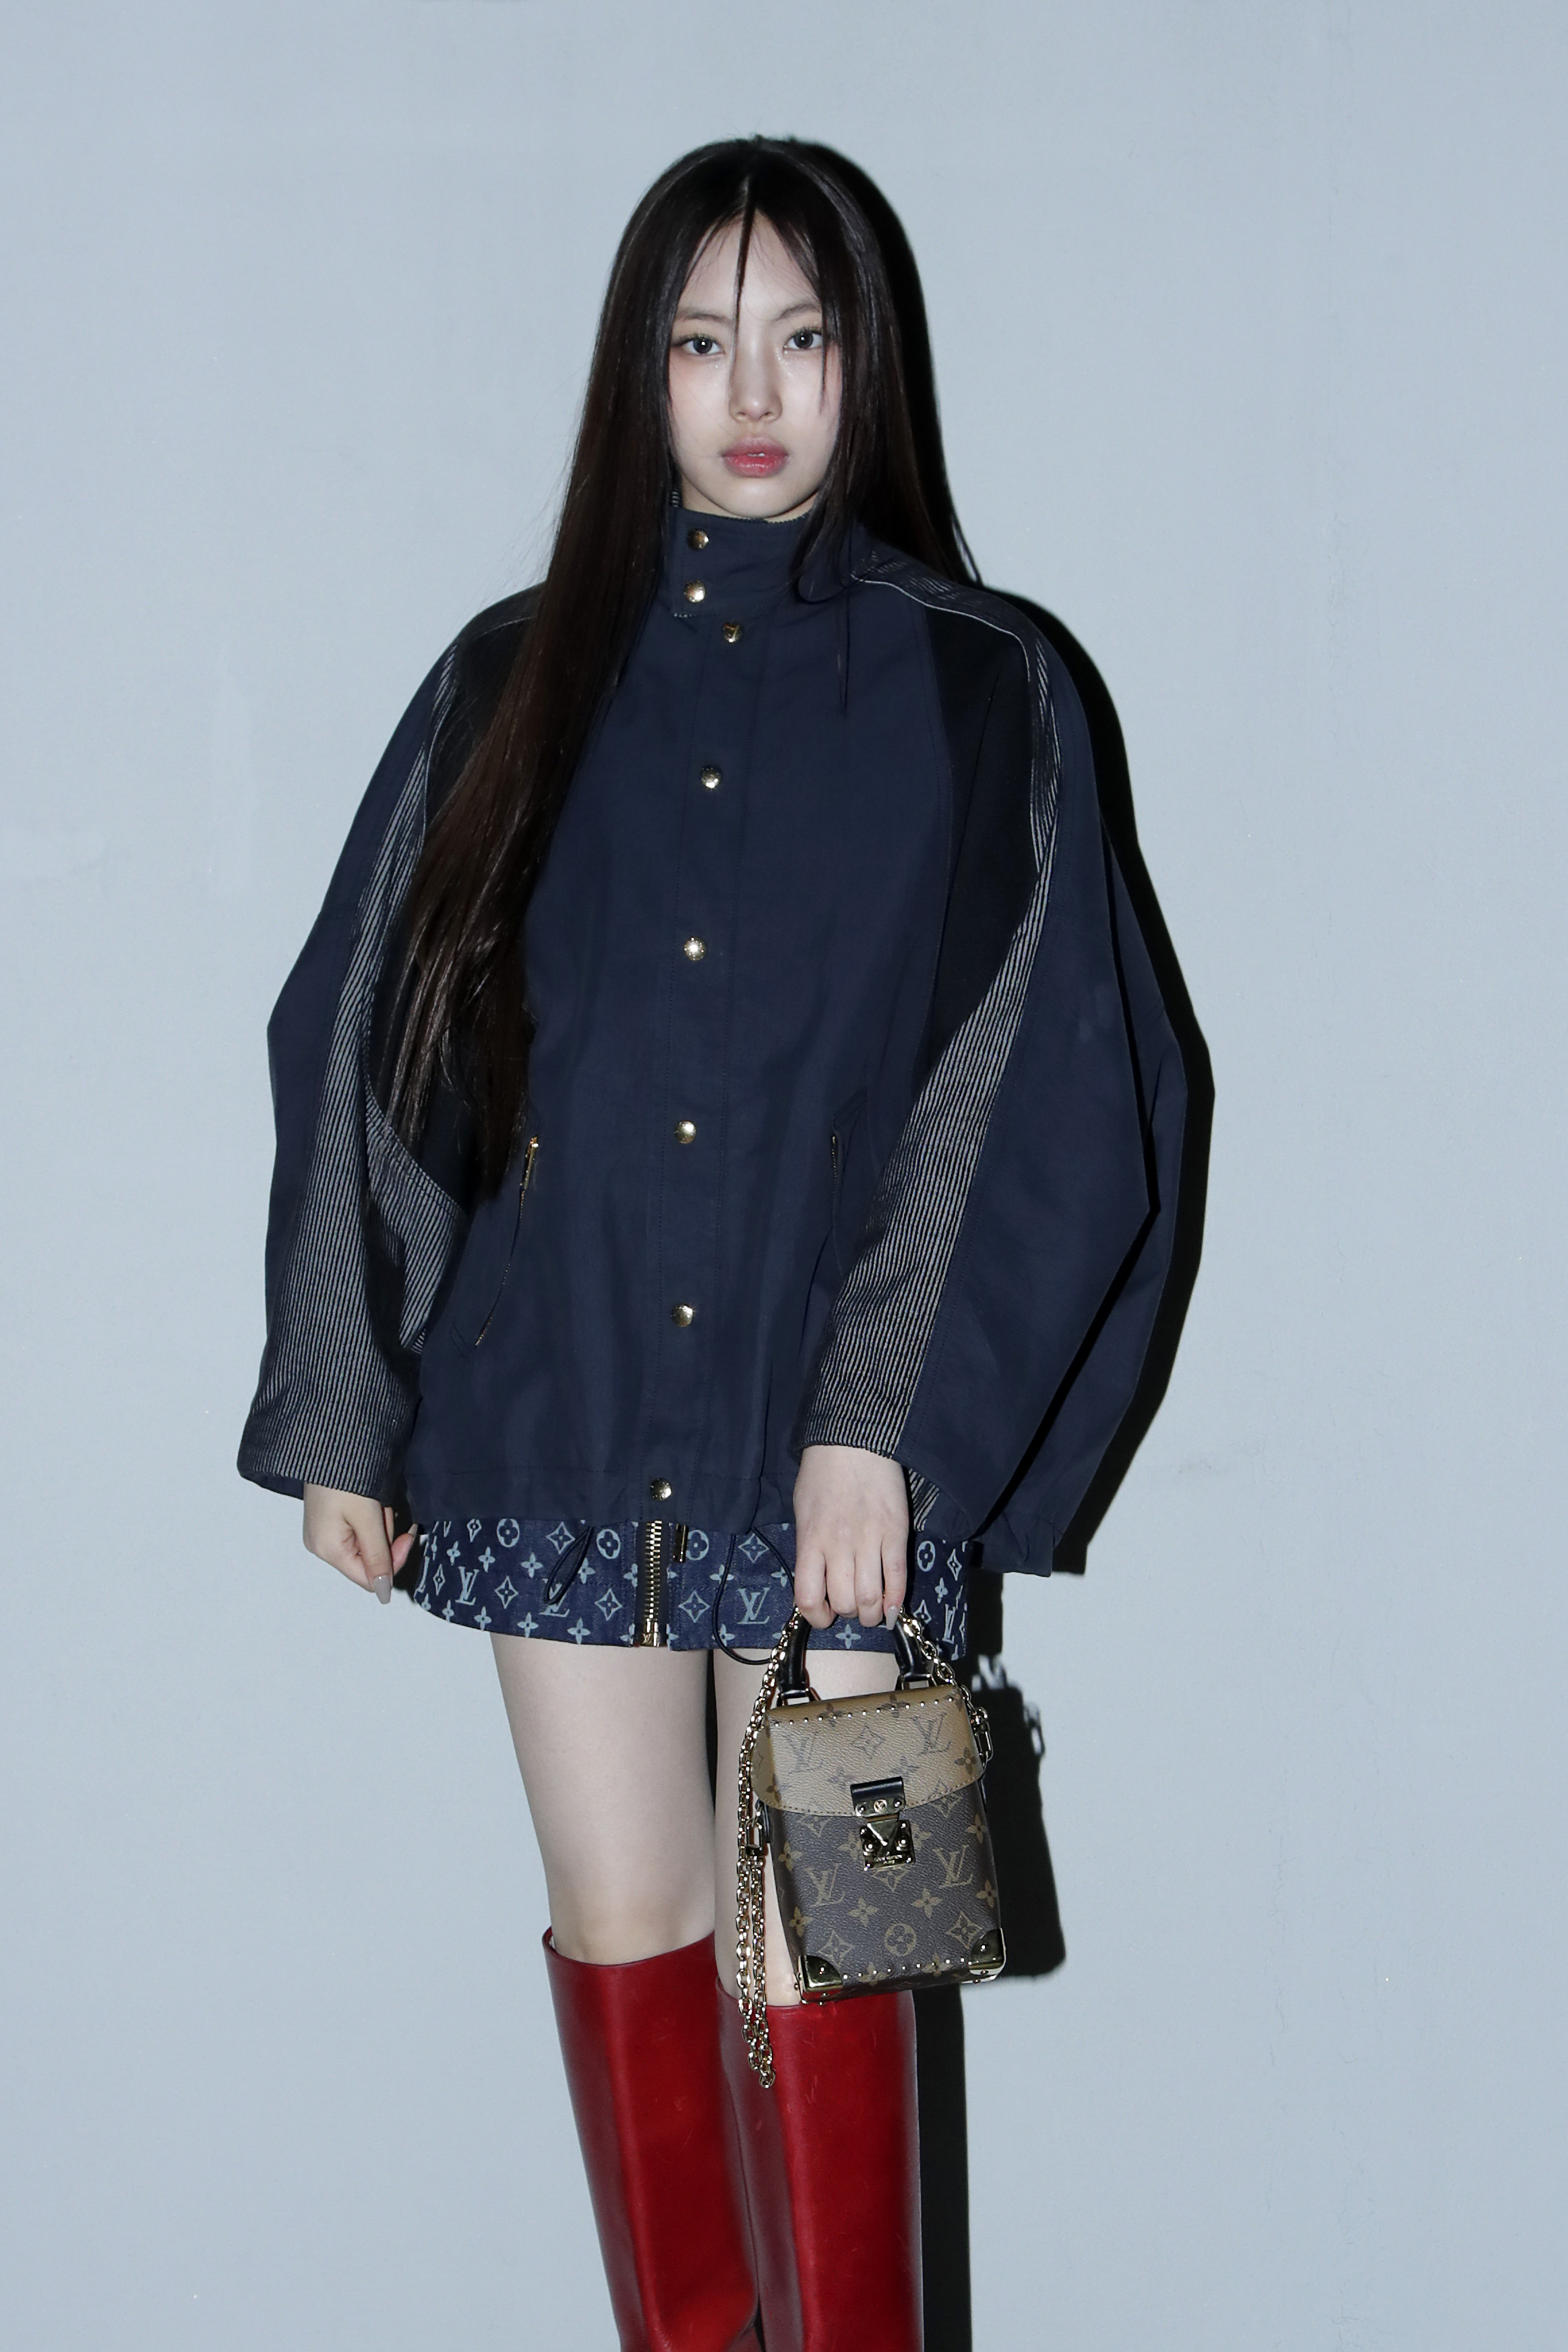 14-Year-Old NewJeans' Hyein Stuns with her model-like vibes at